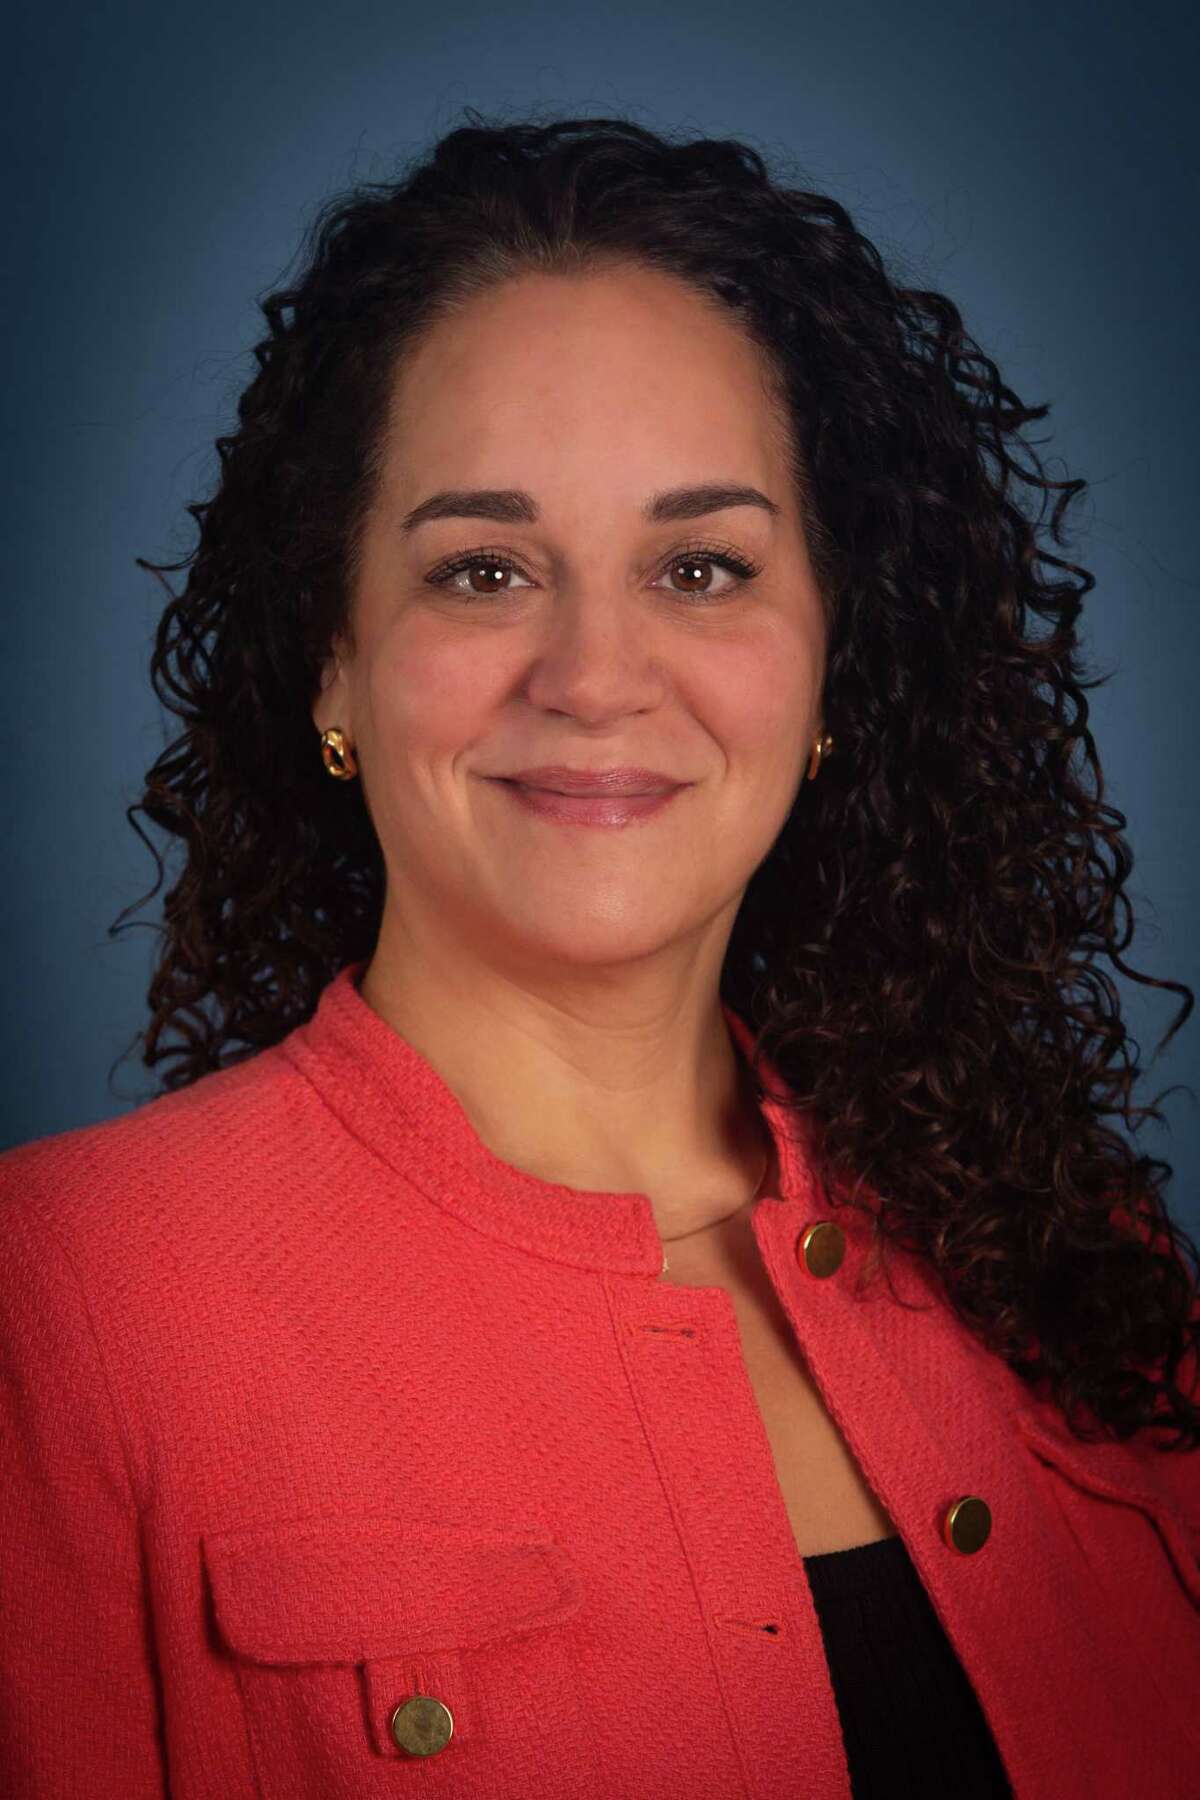 Republican school board member Michelle Coelho is running against state Sen. Julie Kushner, D-Danbury, to represent the 24th District in the state Senate.